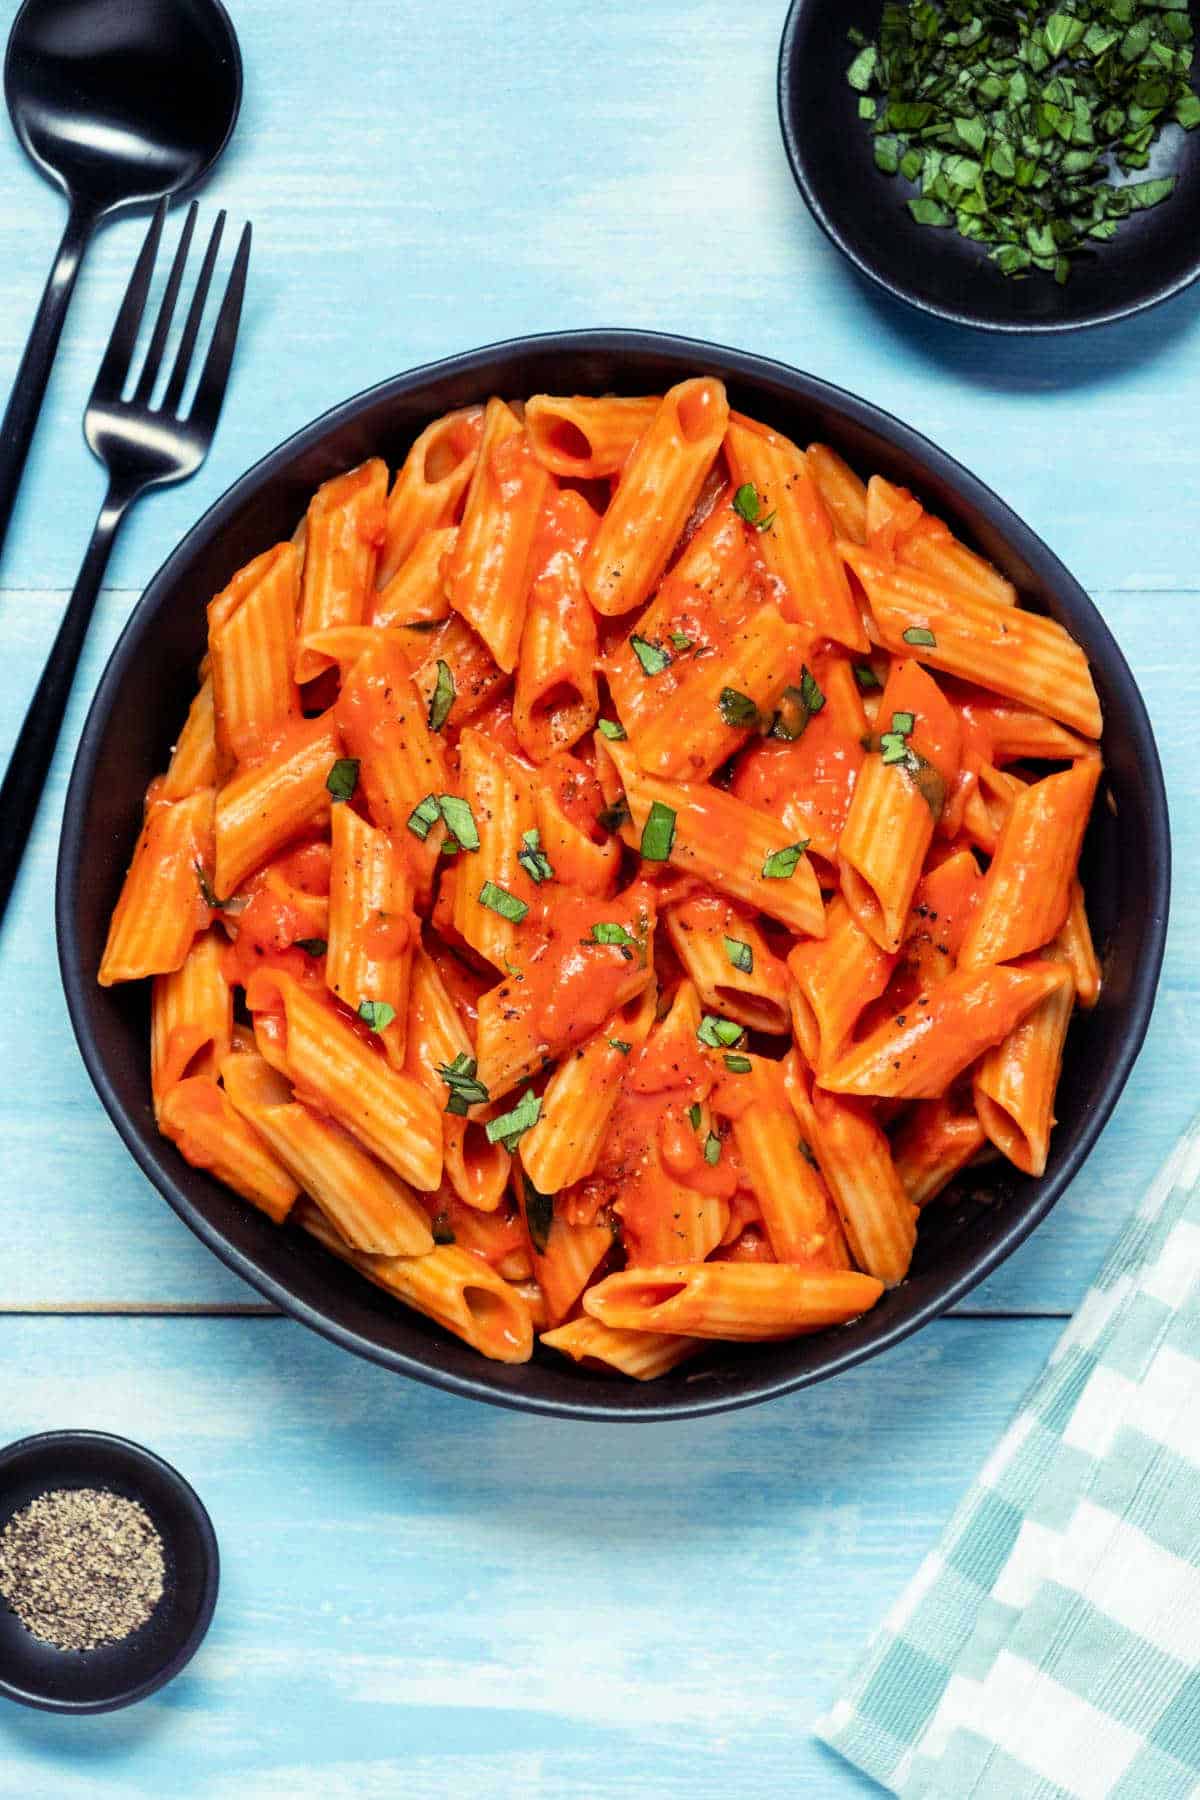 Penne and vegan vodka sauce in a black bowl.